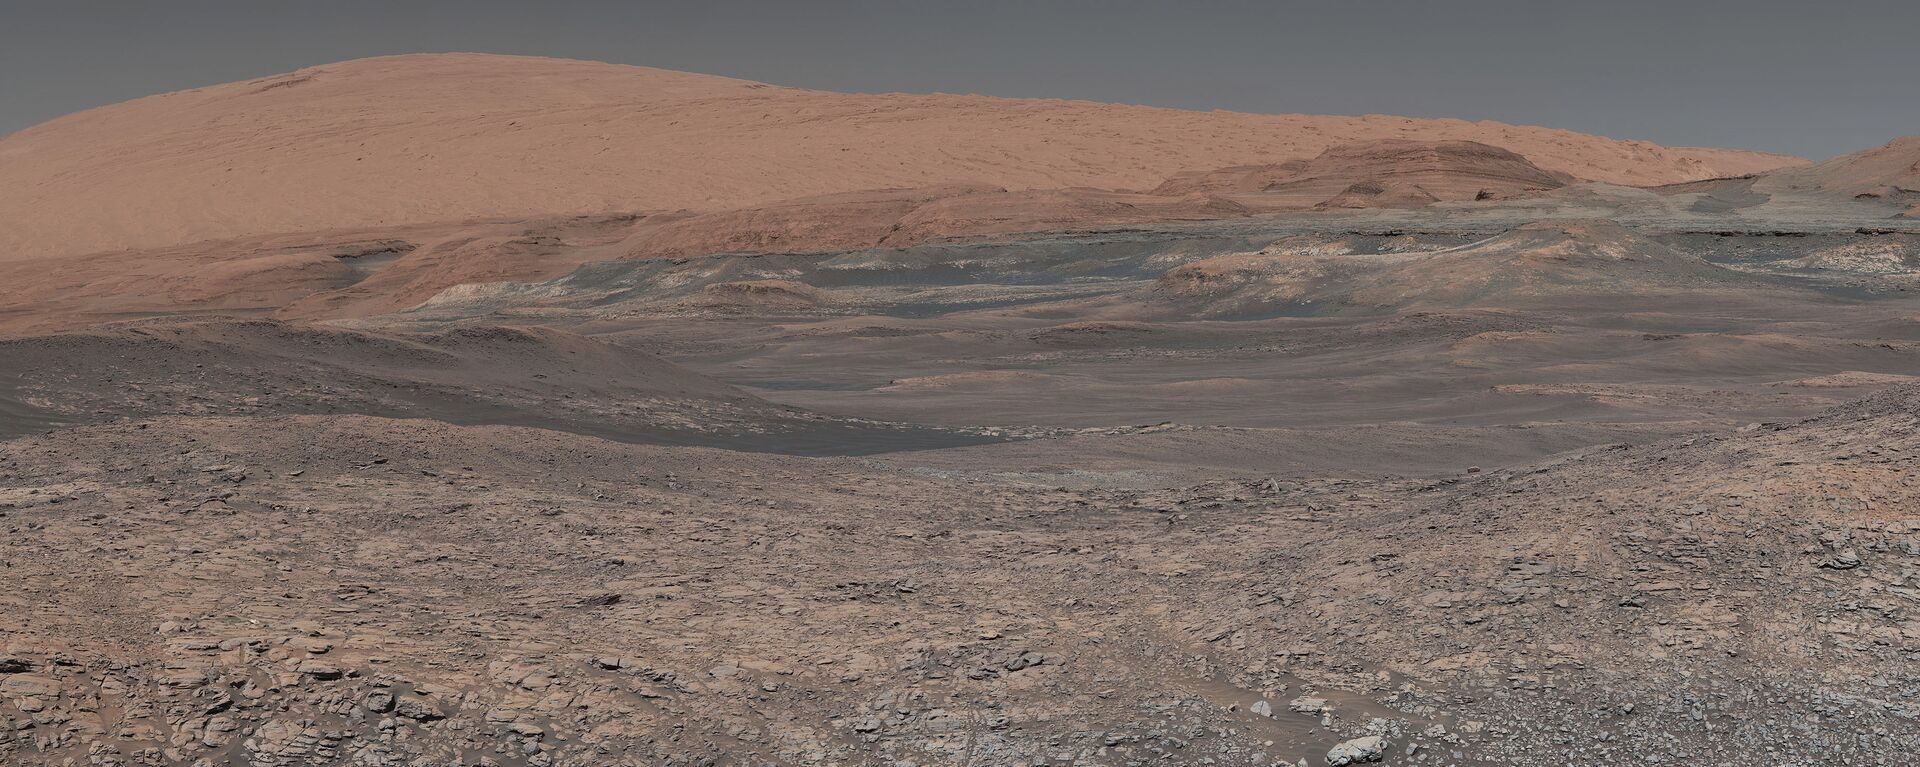 This image provided by NASA, assembled from a series of January 2018 photos made by the Mars Curiosity rover, shows an uphill view of Mount Sharp, which Curiosity has been climbing. - Sputnik International, 1920, 04.02.2021